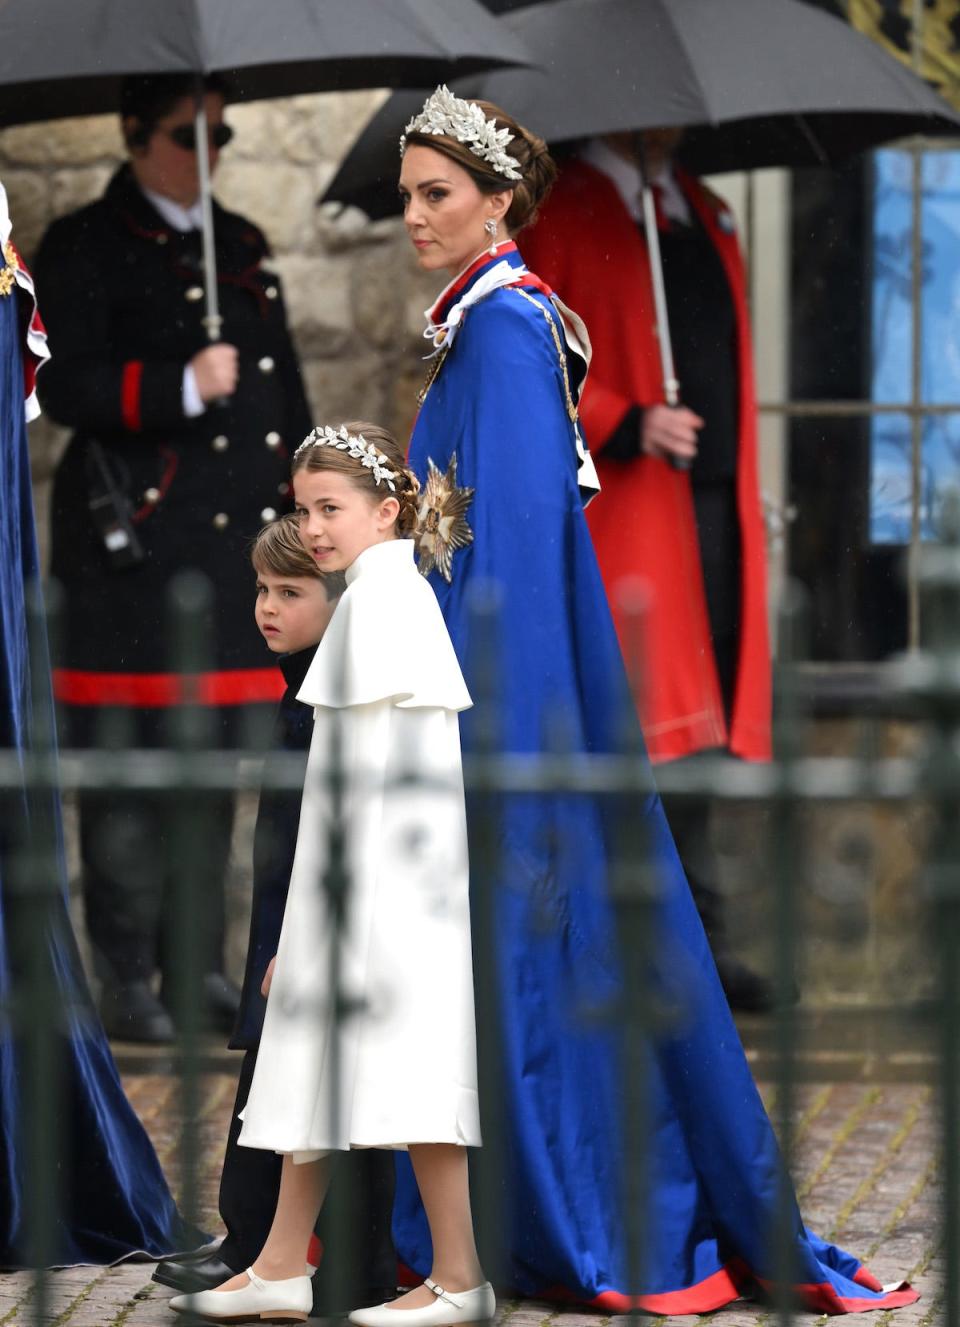 Catherine, Princess of Wales, Prince Louis, and Princess Charlotte arrive at Westminster Abbey for the Coronation of King Charles III and Queen Camilla on May 06, 2023 in London, England.